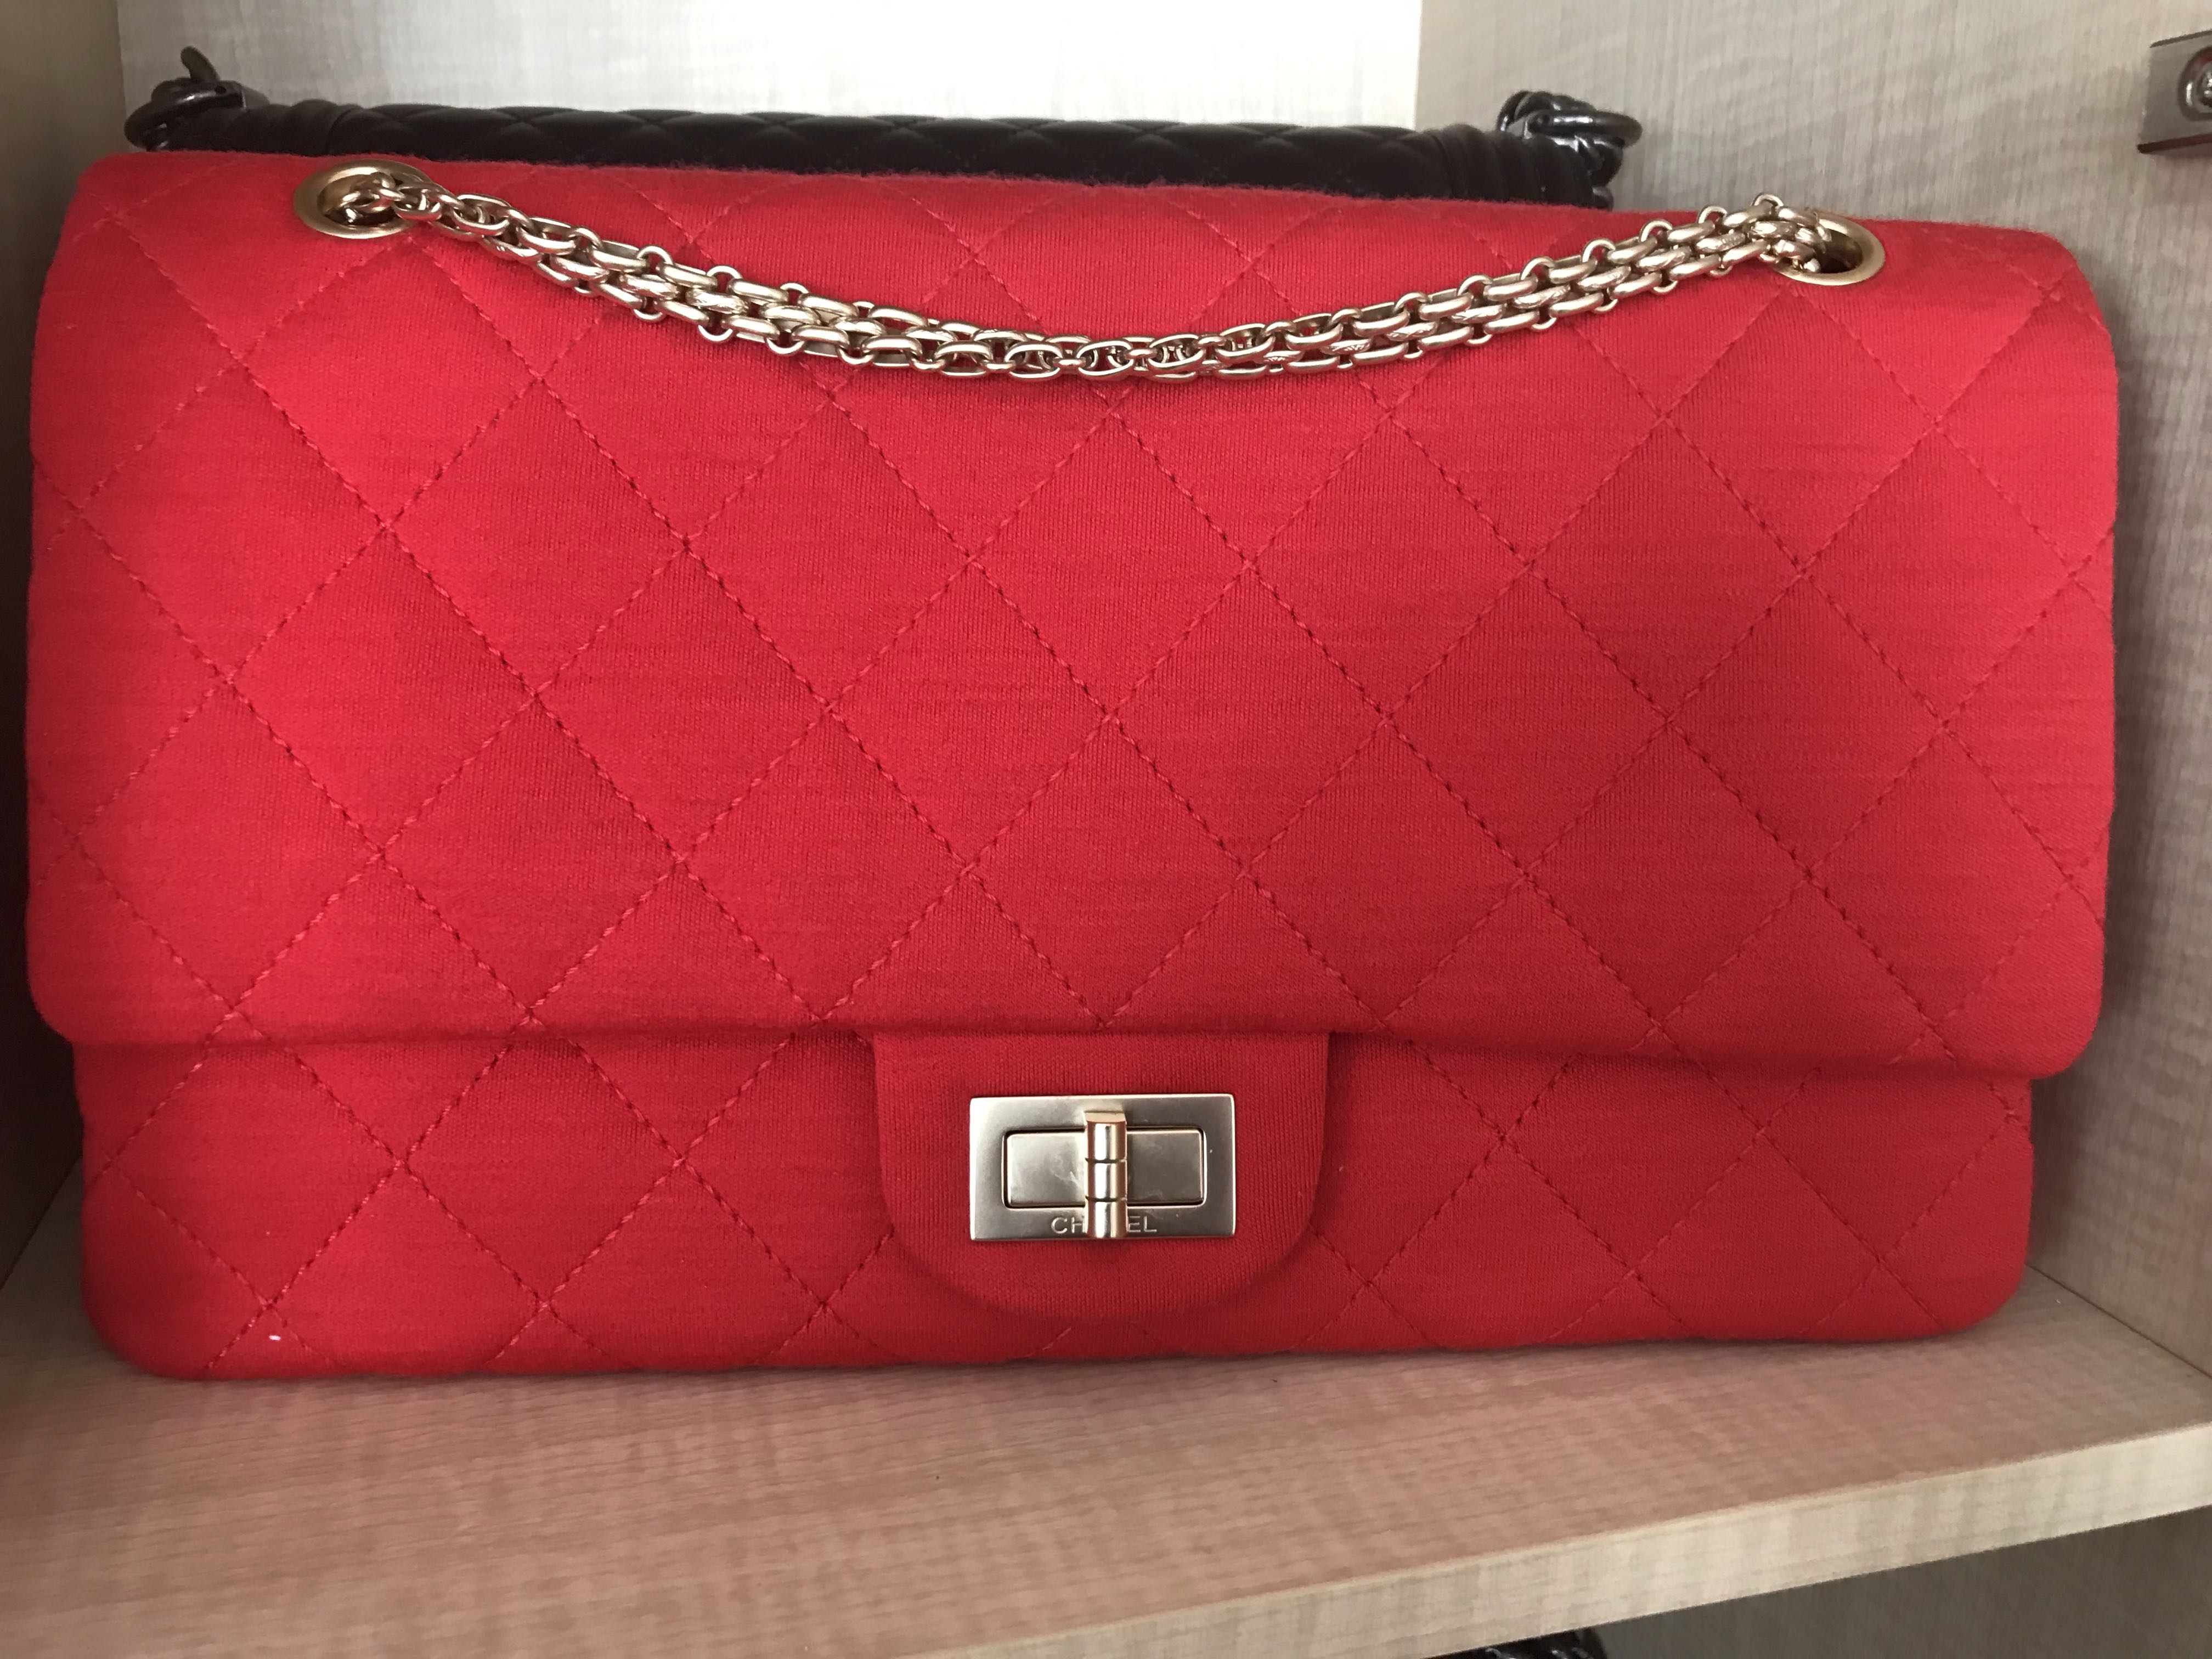 Chanel Red 2.55 Reissue Quilted Classic Jersey Leather 227 Jumbo Flap Bag -  Yoogi's Closet